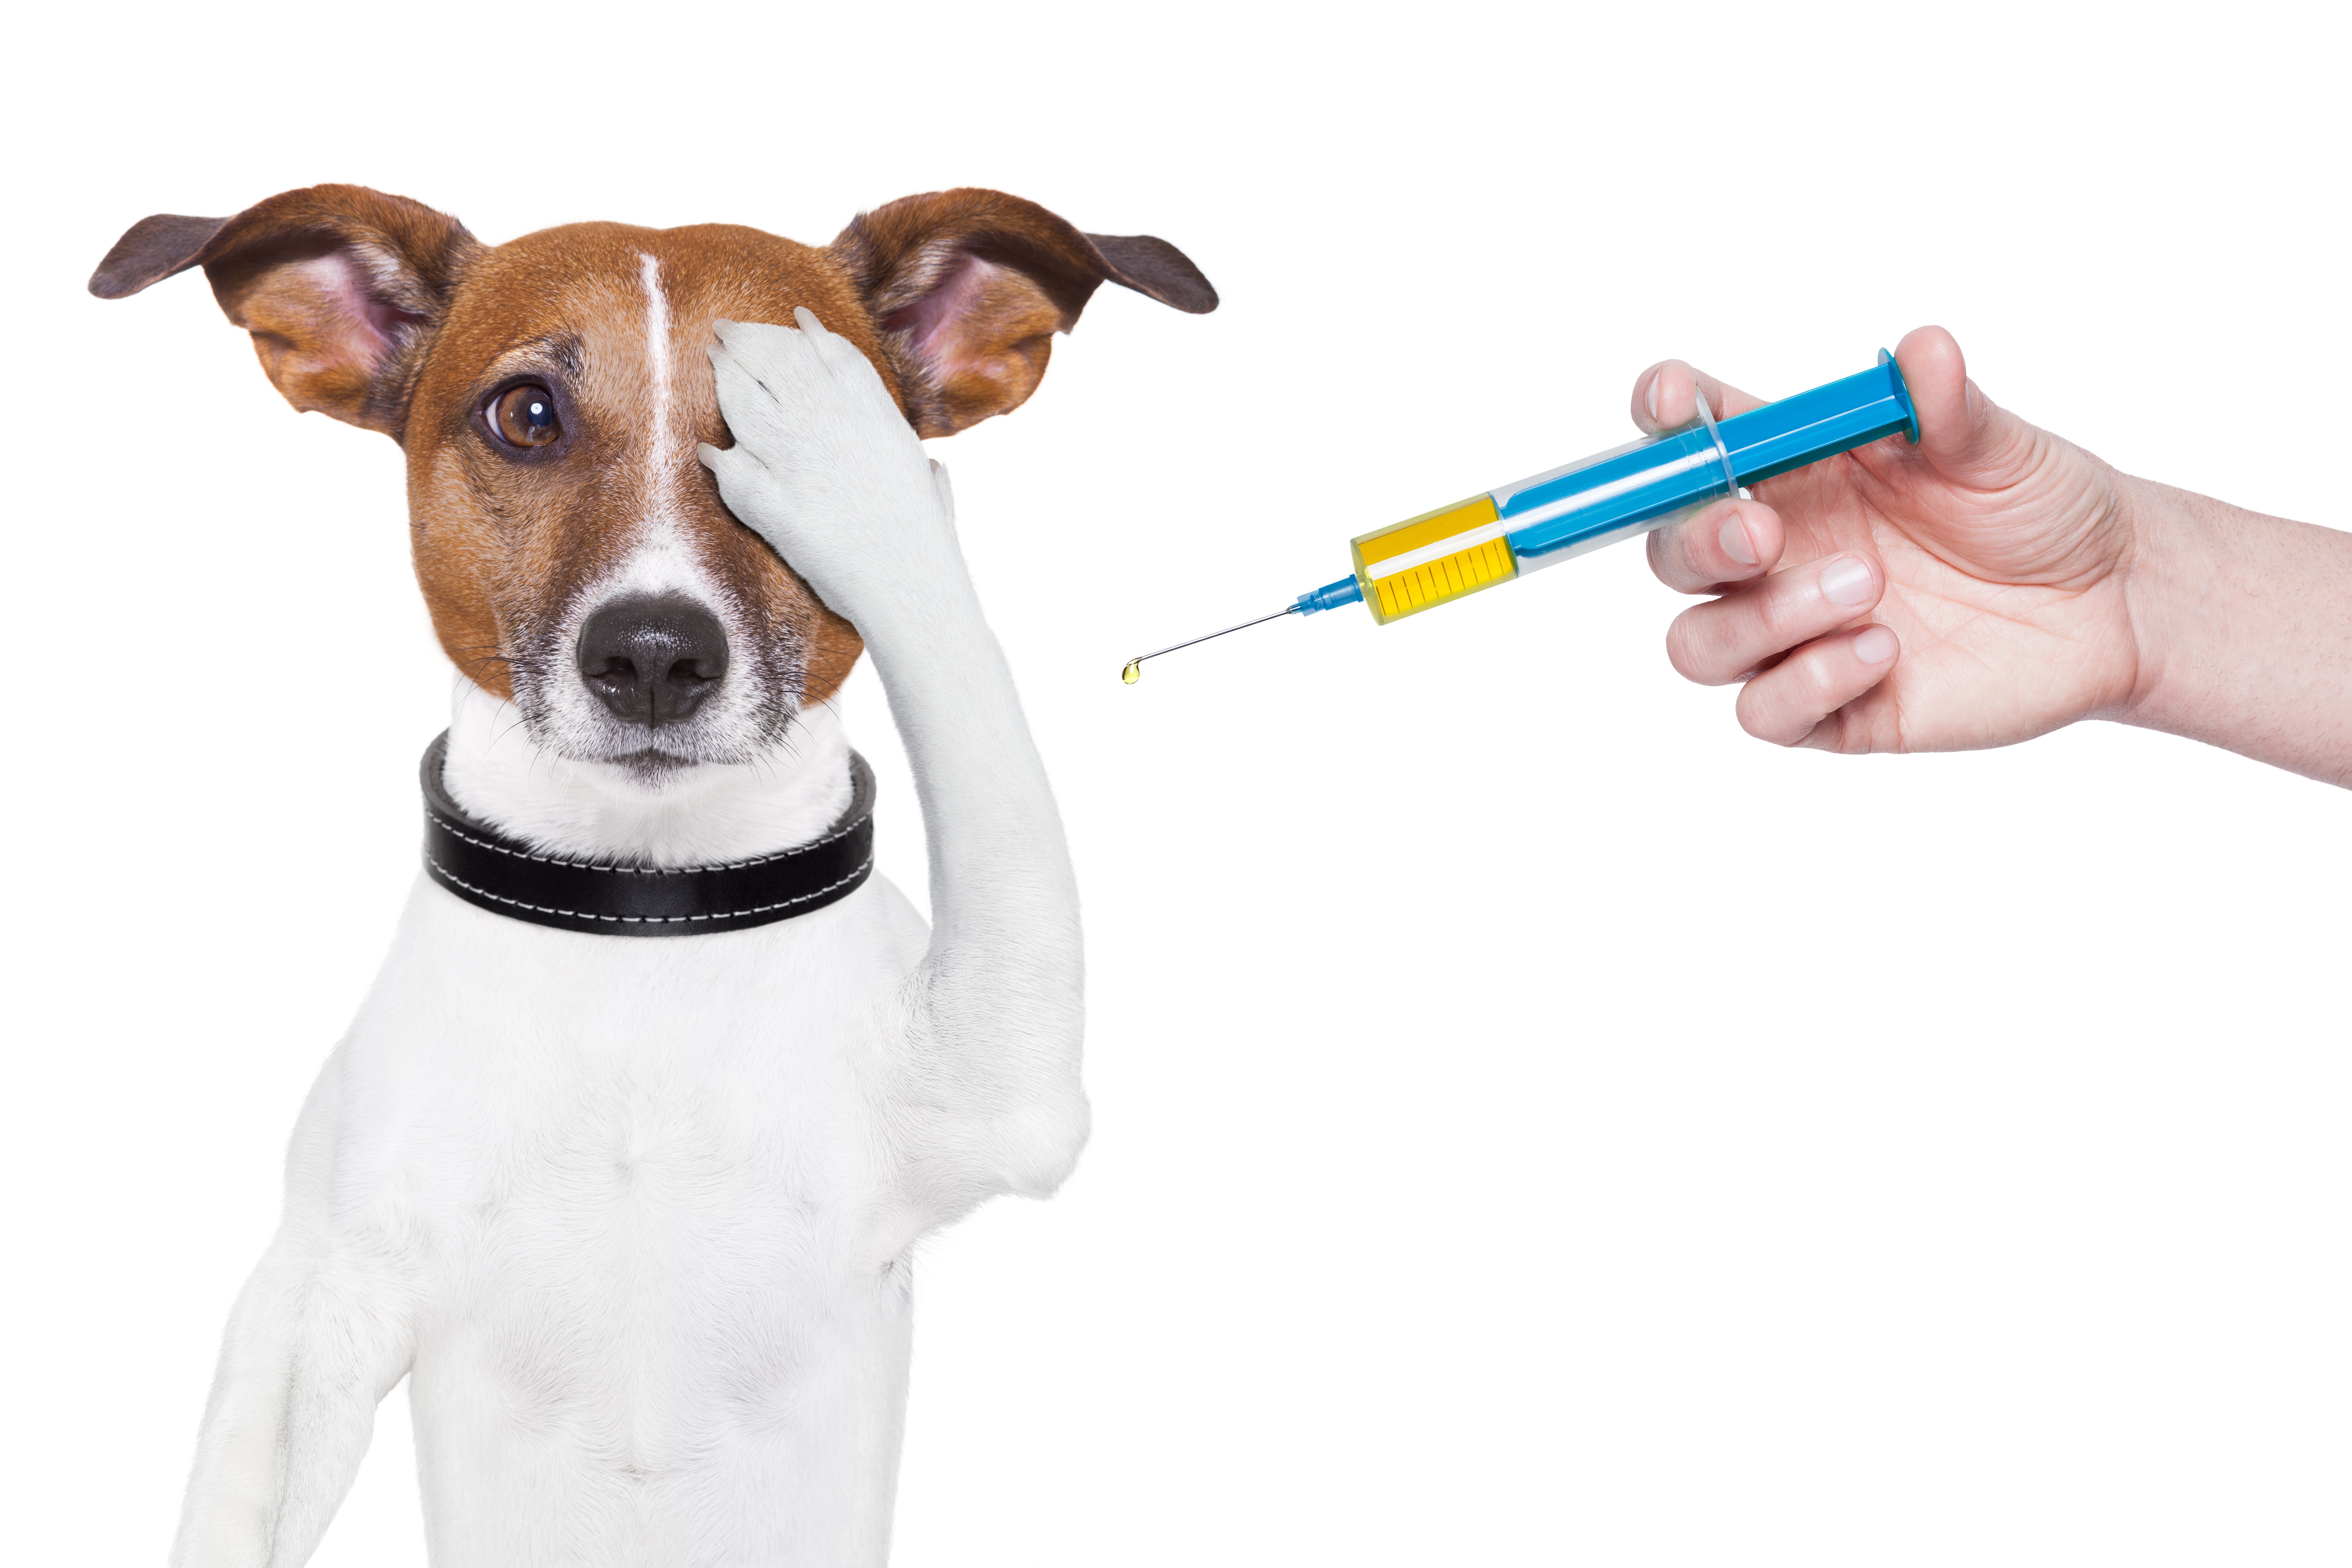 worm shots for dogs